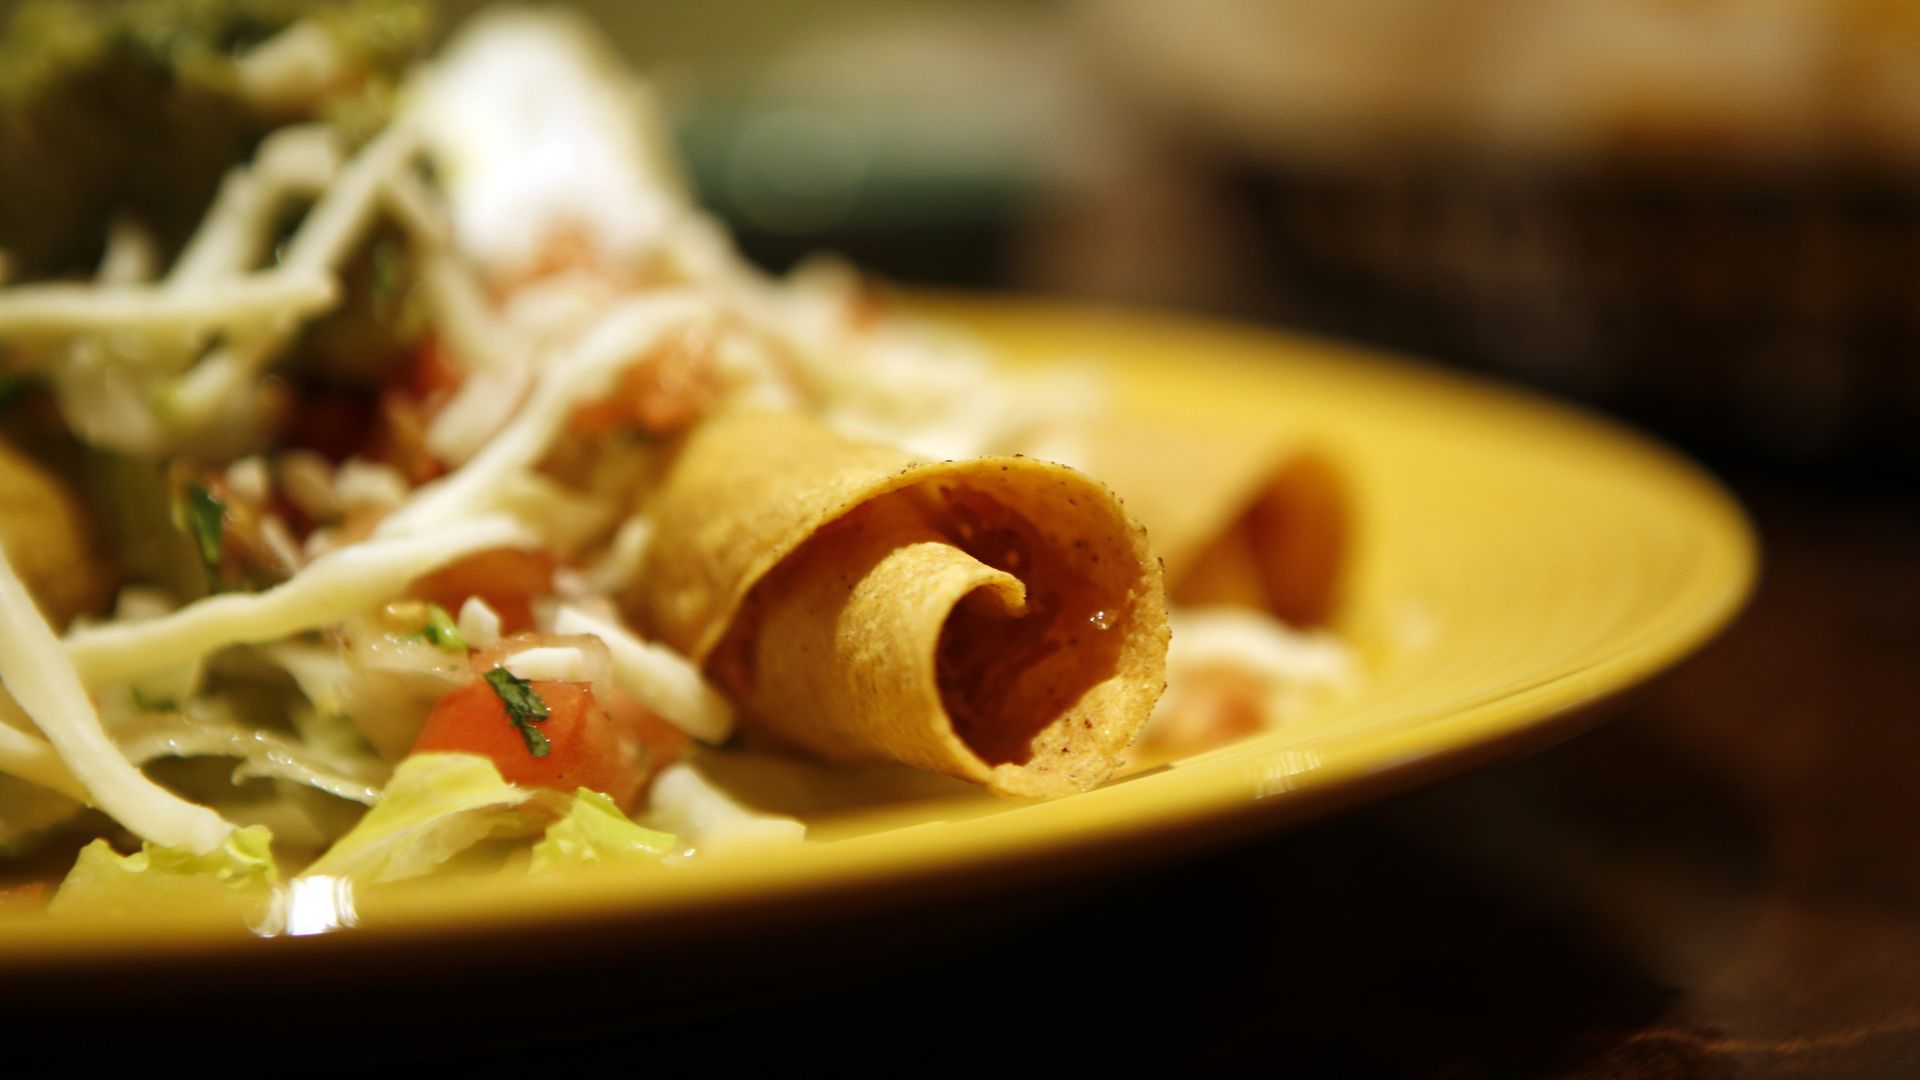 A taquito on a plate with Mexican sides